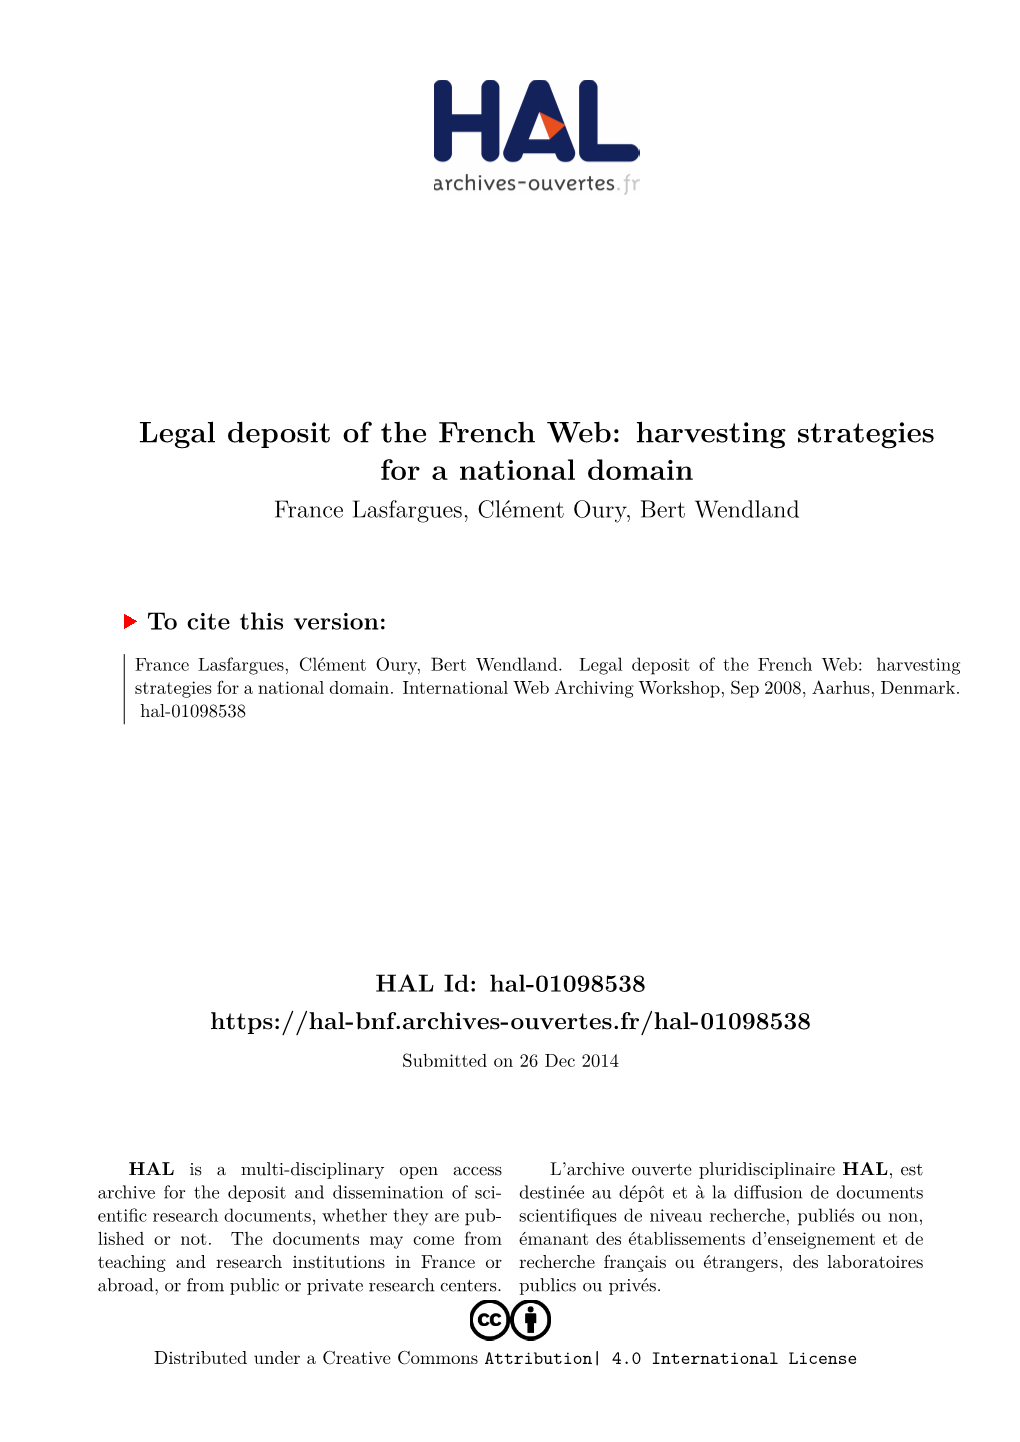 Harvesting Strategies for a National Domain France Lasfargues, Clément Oury, Bert Wendland